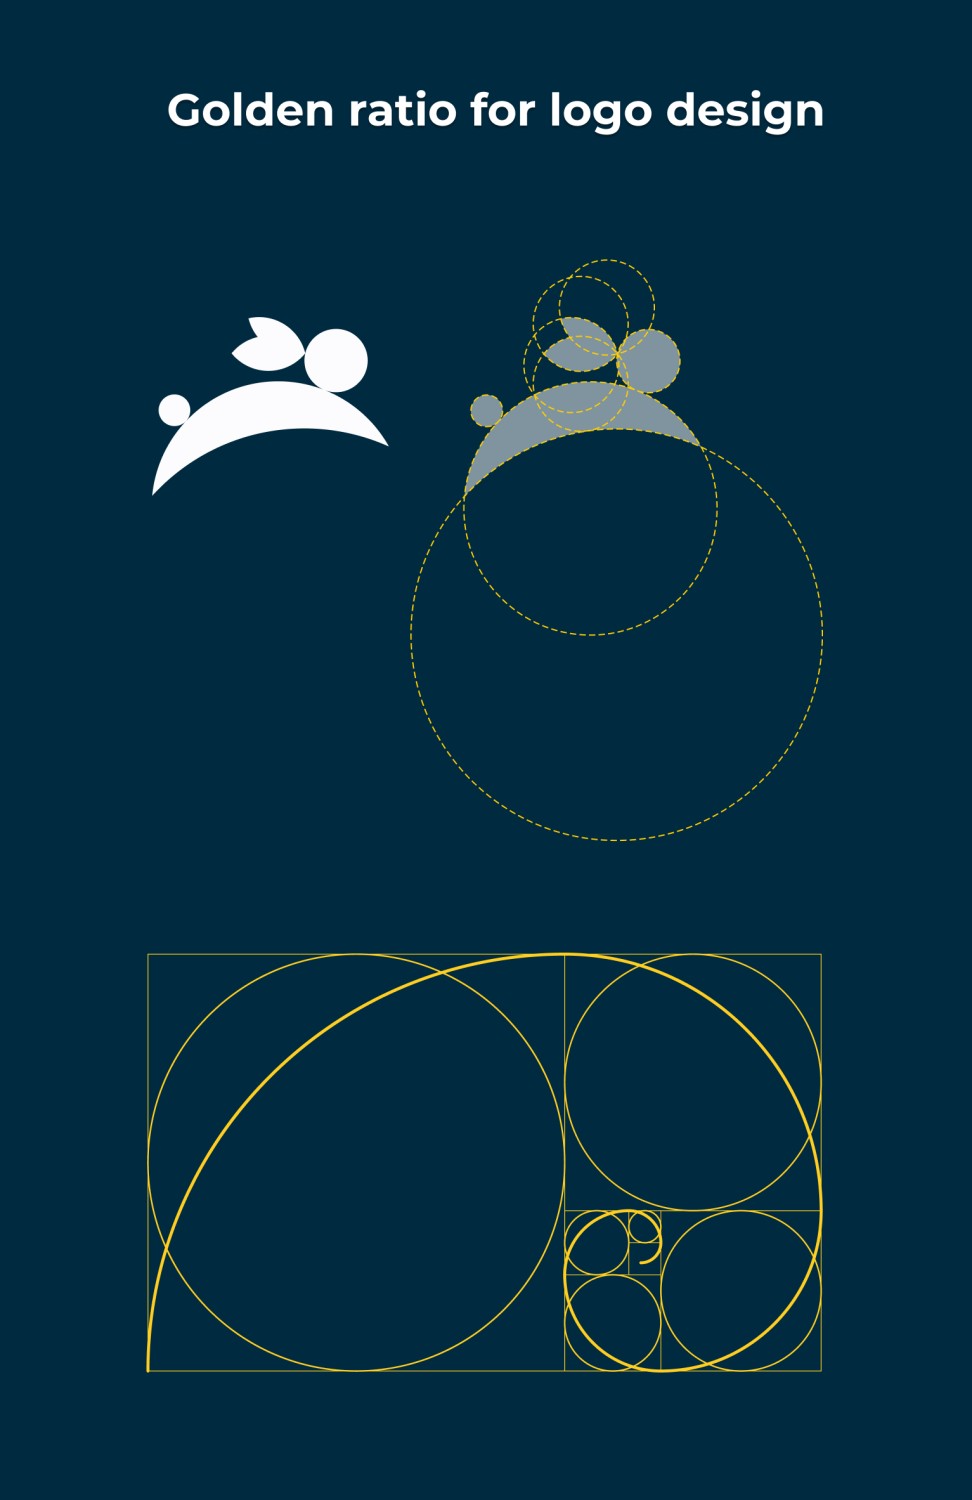 Logo of a rabbit using the mathematical circles of the golden ratio to create each part of the rabbit harmoniously.